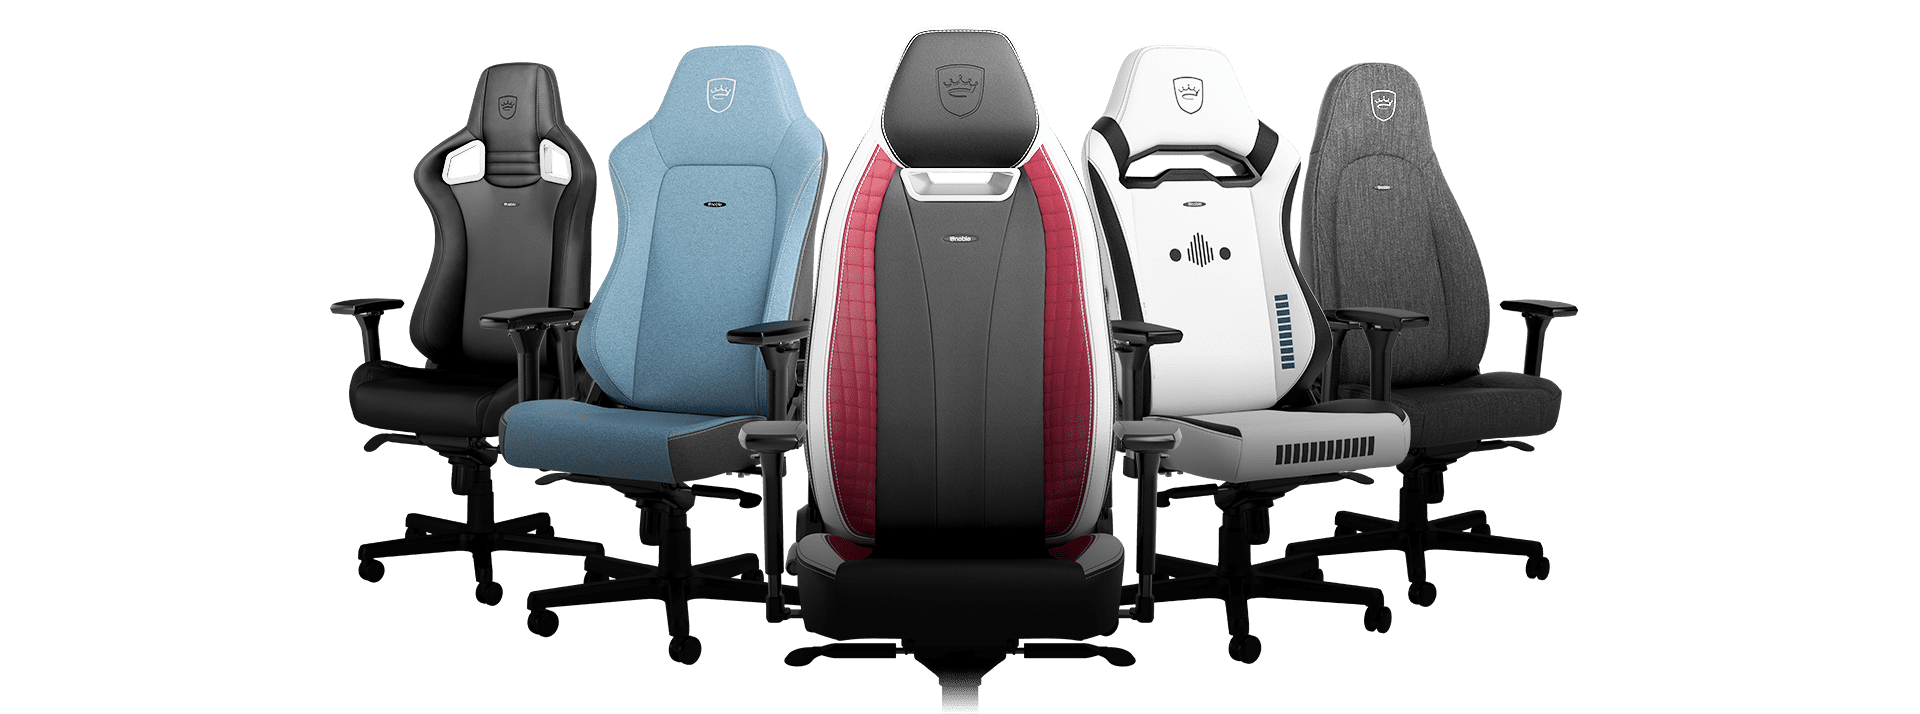 noblechairs gaming chair product portfolio